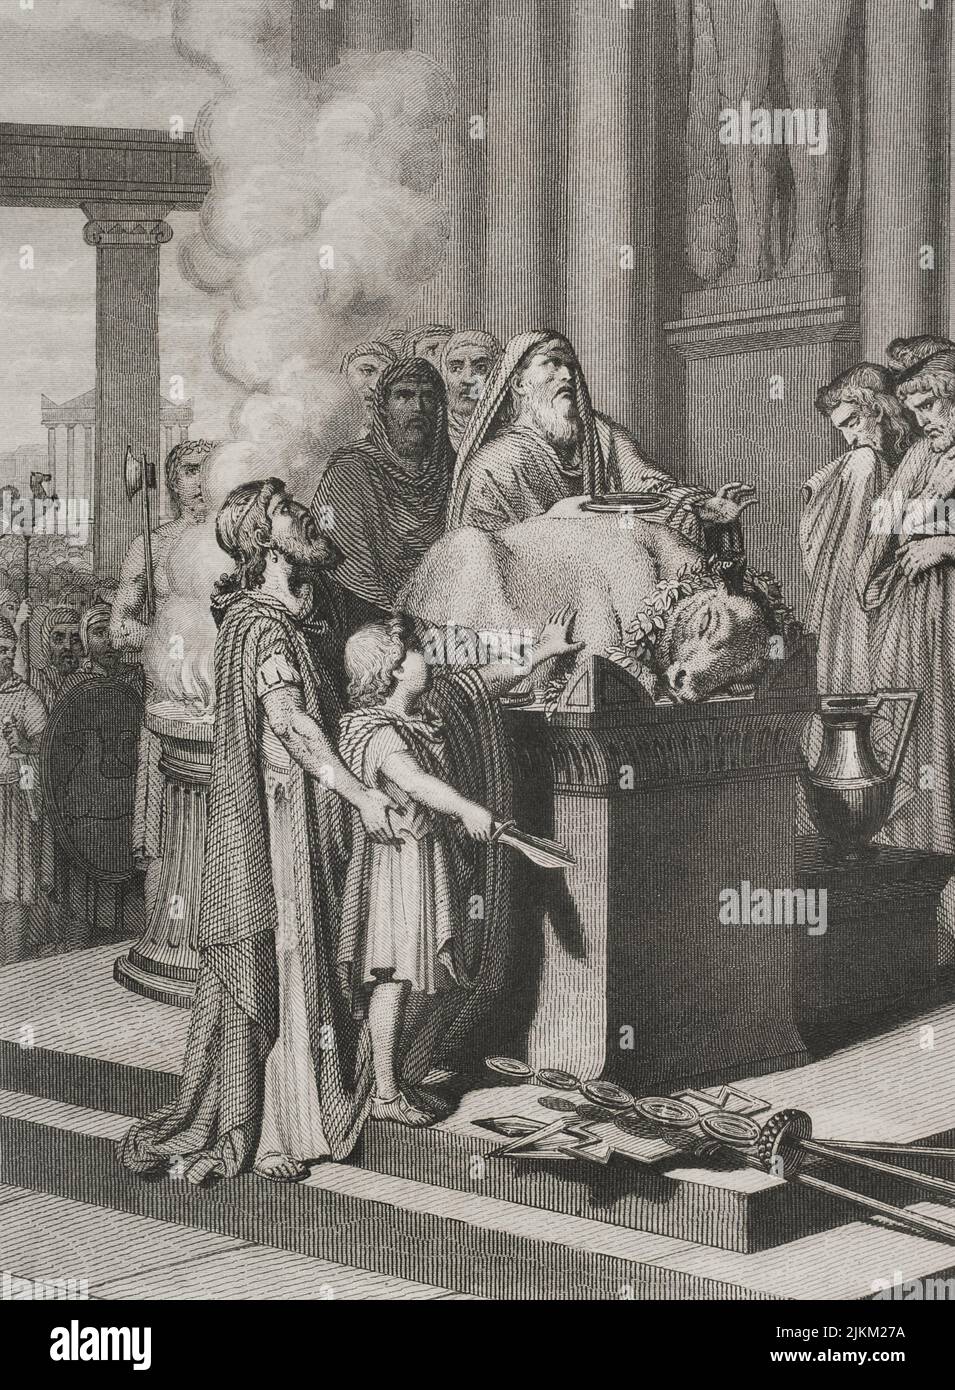 Hannibal Barca (247-183 BC). Carthaginian general and statesman. Hannibal in the Temple of Carthage with his father Hamilcar Barca, at the age of nine, taking an oath of eternal hatred of Rome by dipping his hands in the blood of the sacrificed animal. Engraving. "Historia Universal", by César Cantú. Volume II, 1854. Stock Photo